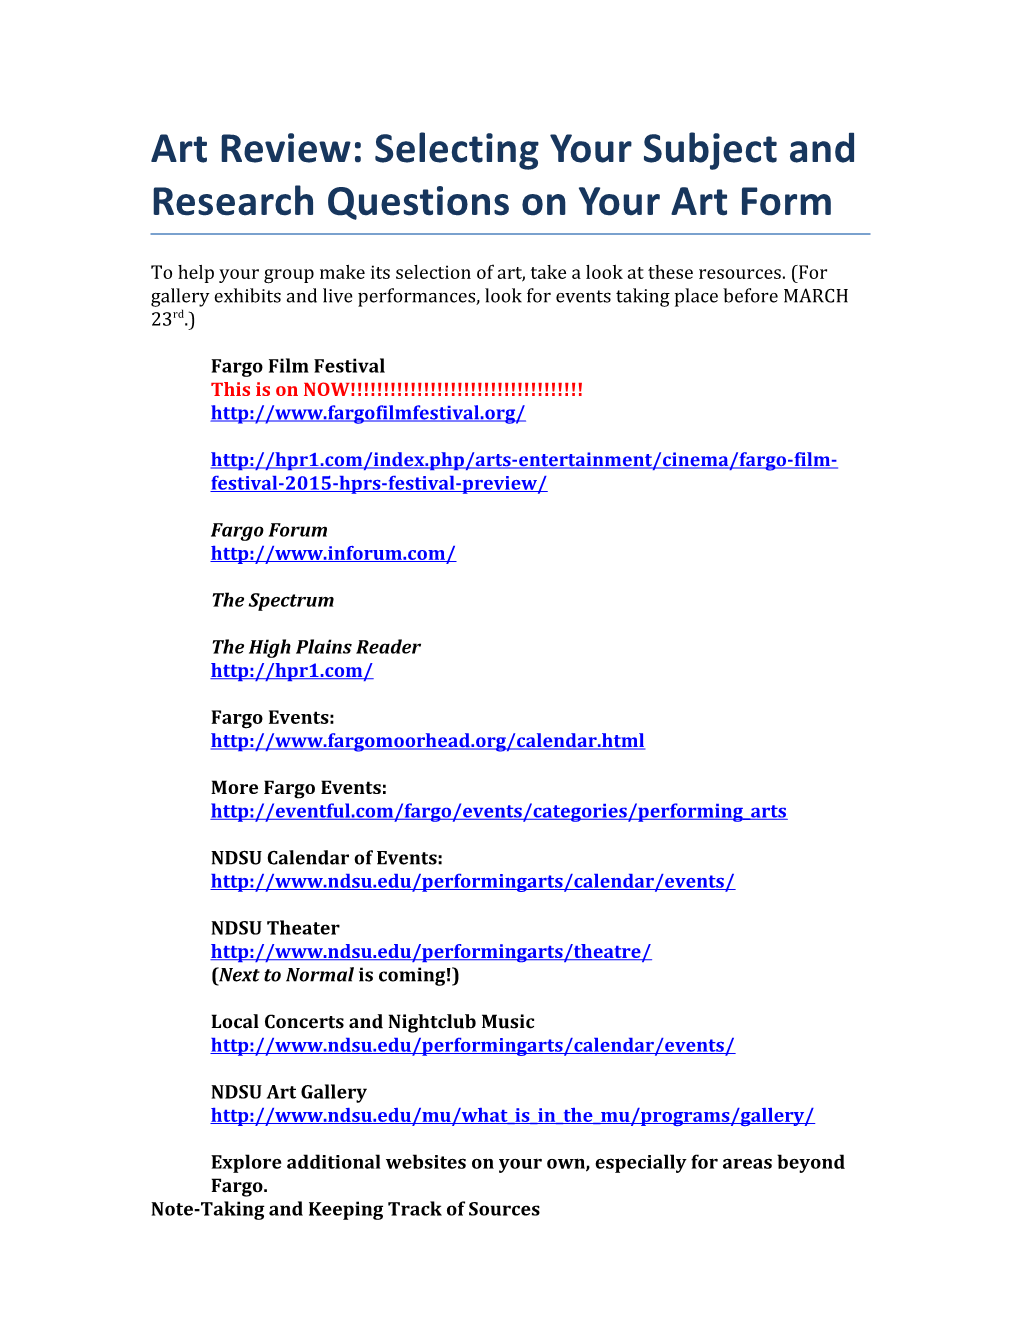 Art Review: Selecting Your Subject and Research Questionson Your Art Form